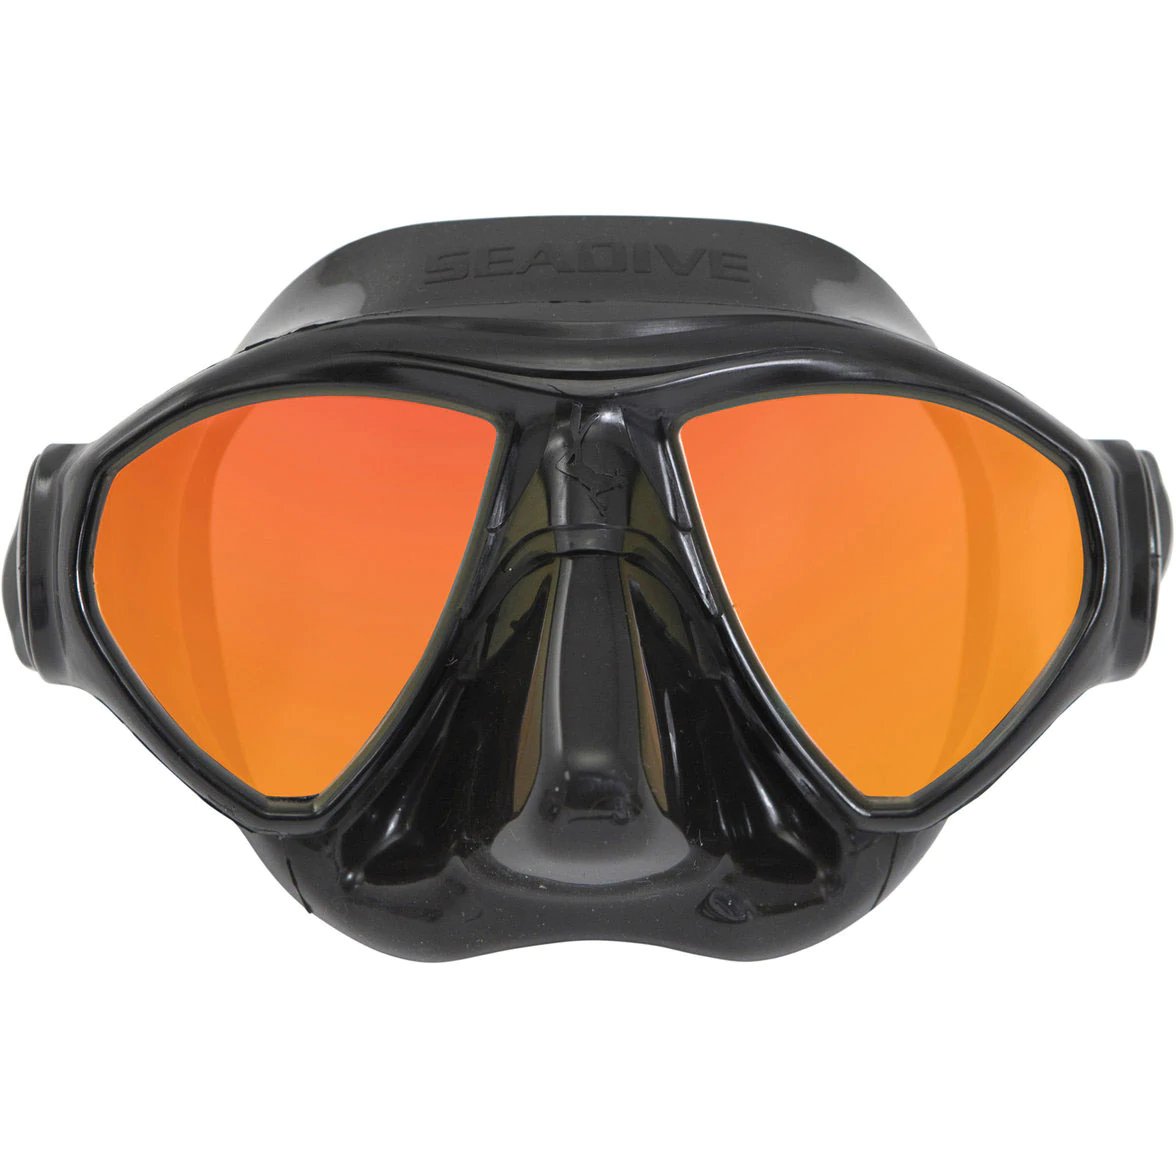 Buy Dive Mask Freediving Mask Spearfishing Mask Low Volume Mini Mask  (Black) Online at Low Prices in India 